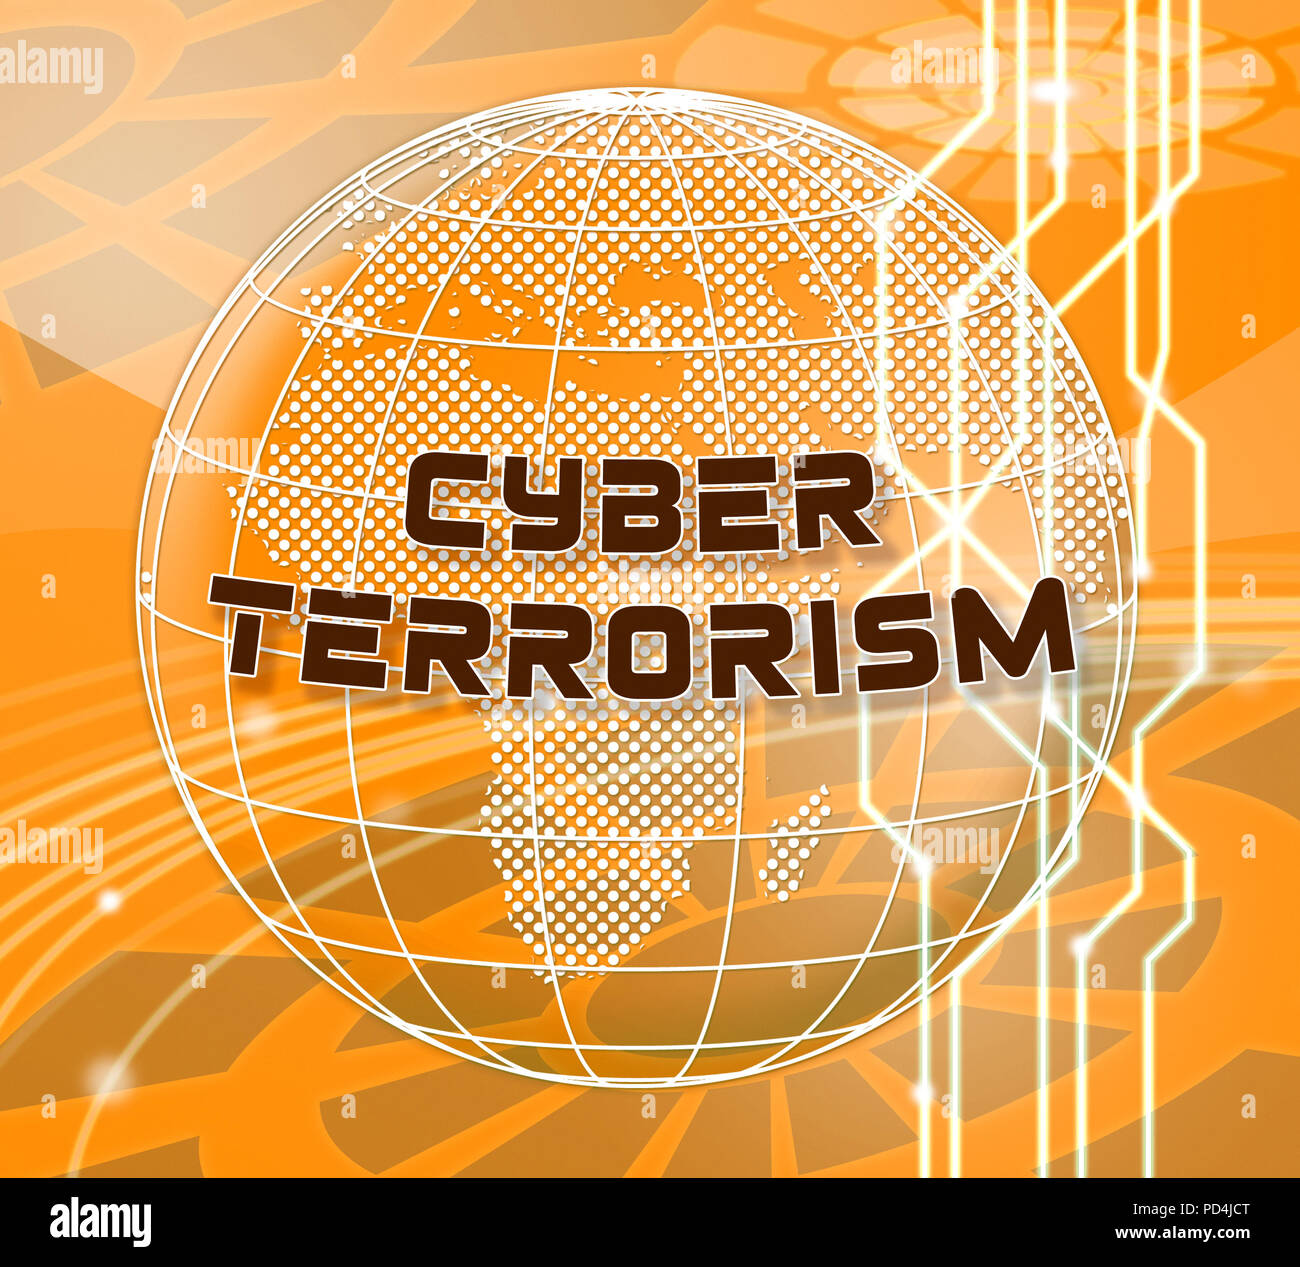 Cyber Terrorism Online Terrorist Crime 3d Illustration Shows Criminal Extremists In A Virtual War Using Espionage And Extortion Stock Photo